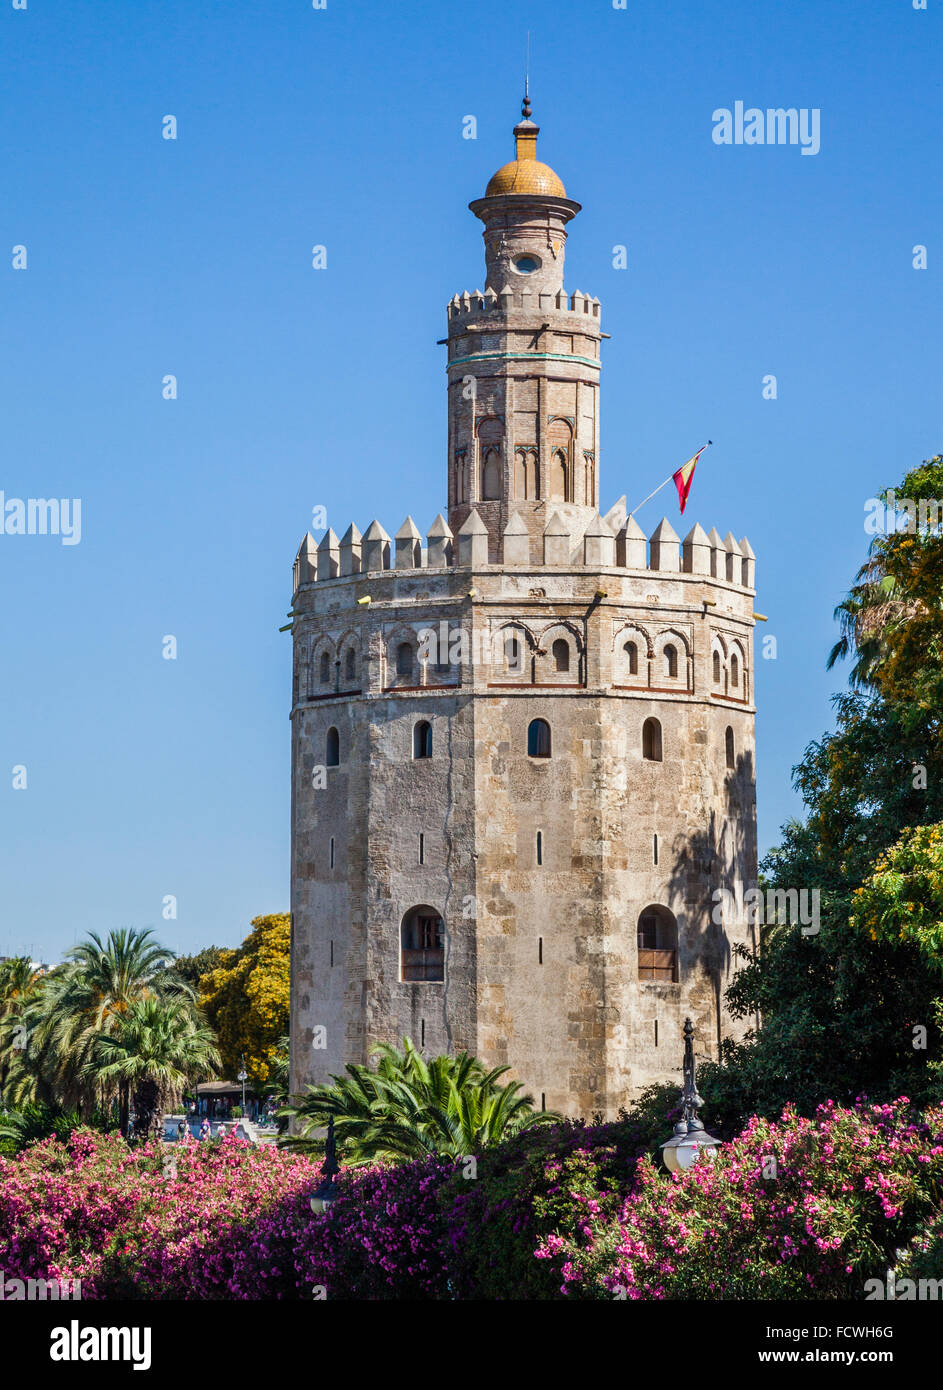 Spain, Andalusia, Province of Seville, Seville, view of Torre del Oro, a 13th century twelve-sided military watchtower Stock Photo